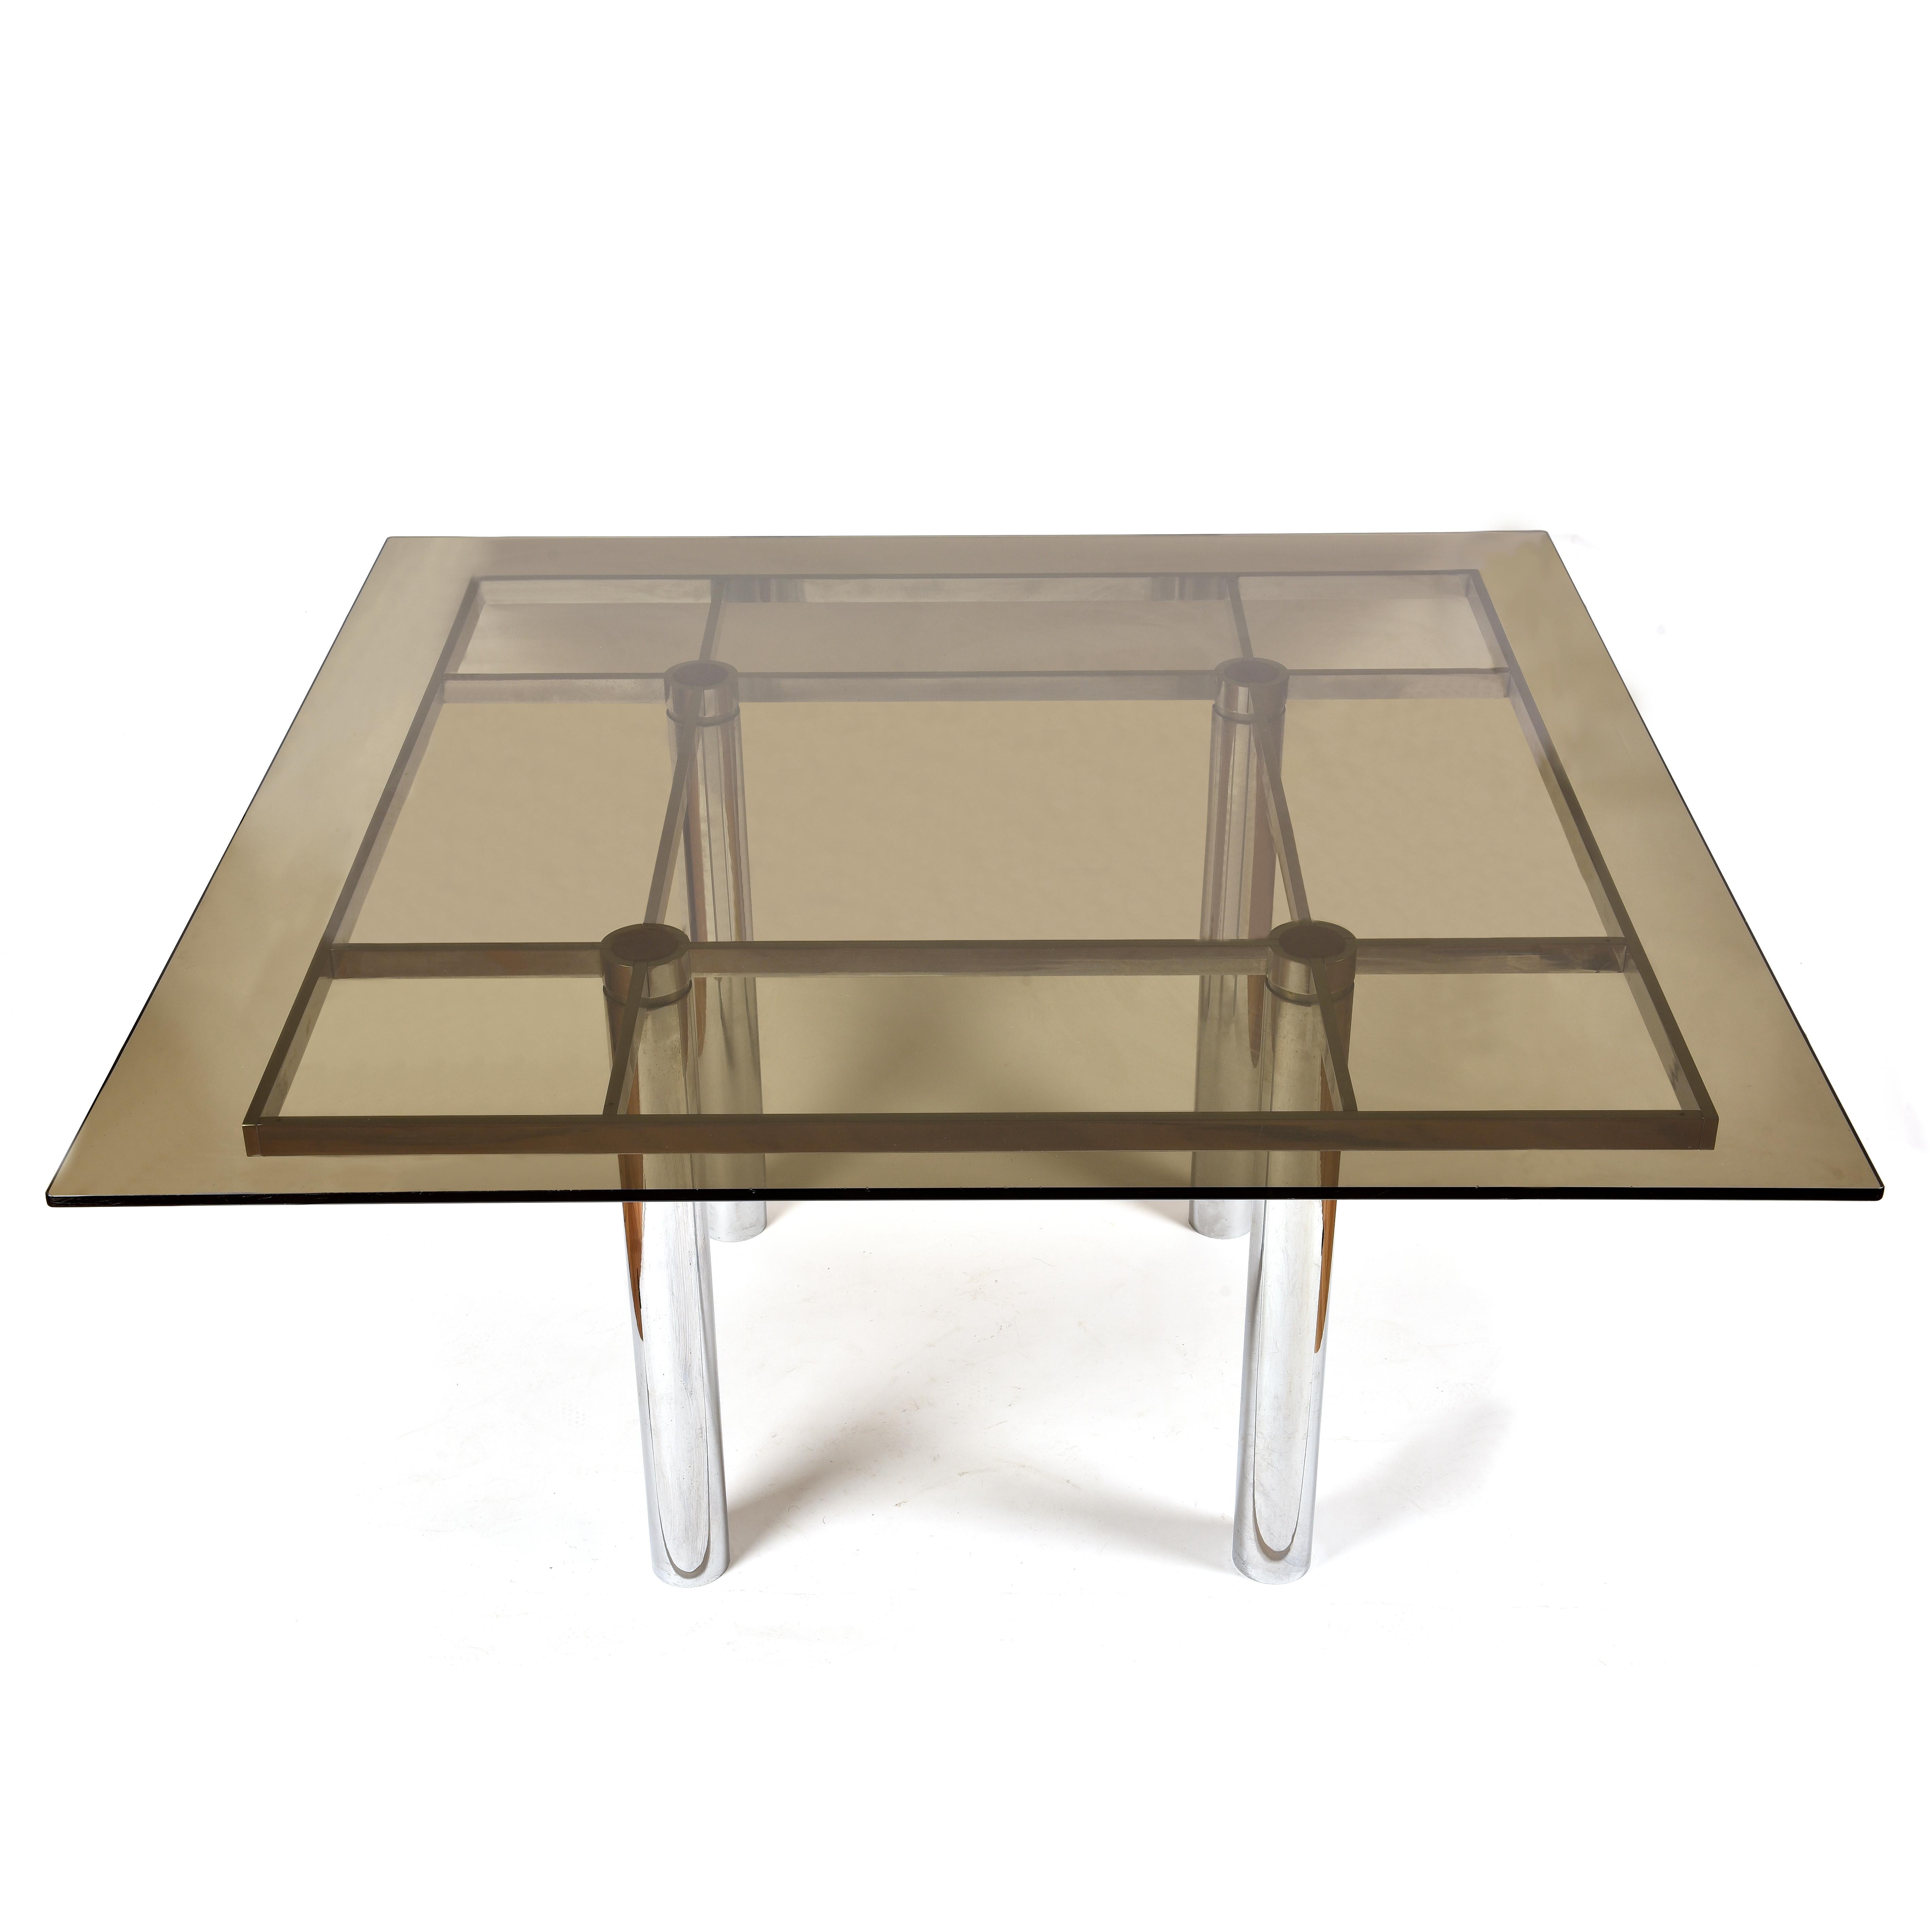 Arfa and Tobia Scarpa (1937-2011 & Born in 1935) 
André dining table, circa 1967 
Knoll international editor 
Dining table with chromed metal structure and tubular legs, square smoked glass plate.